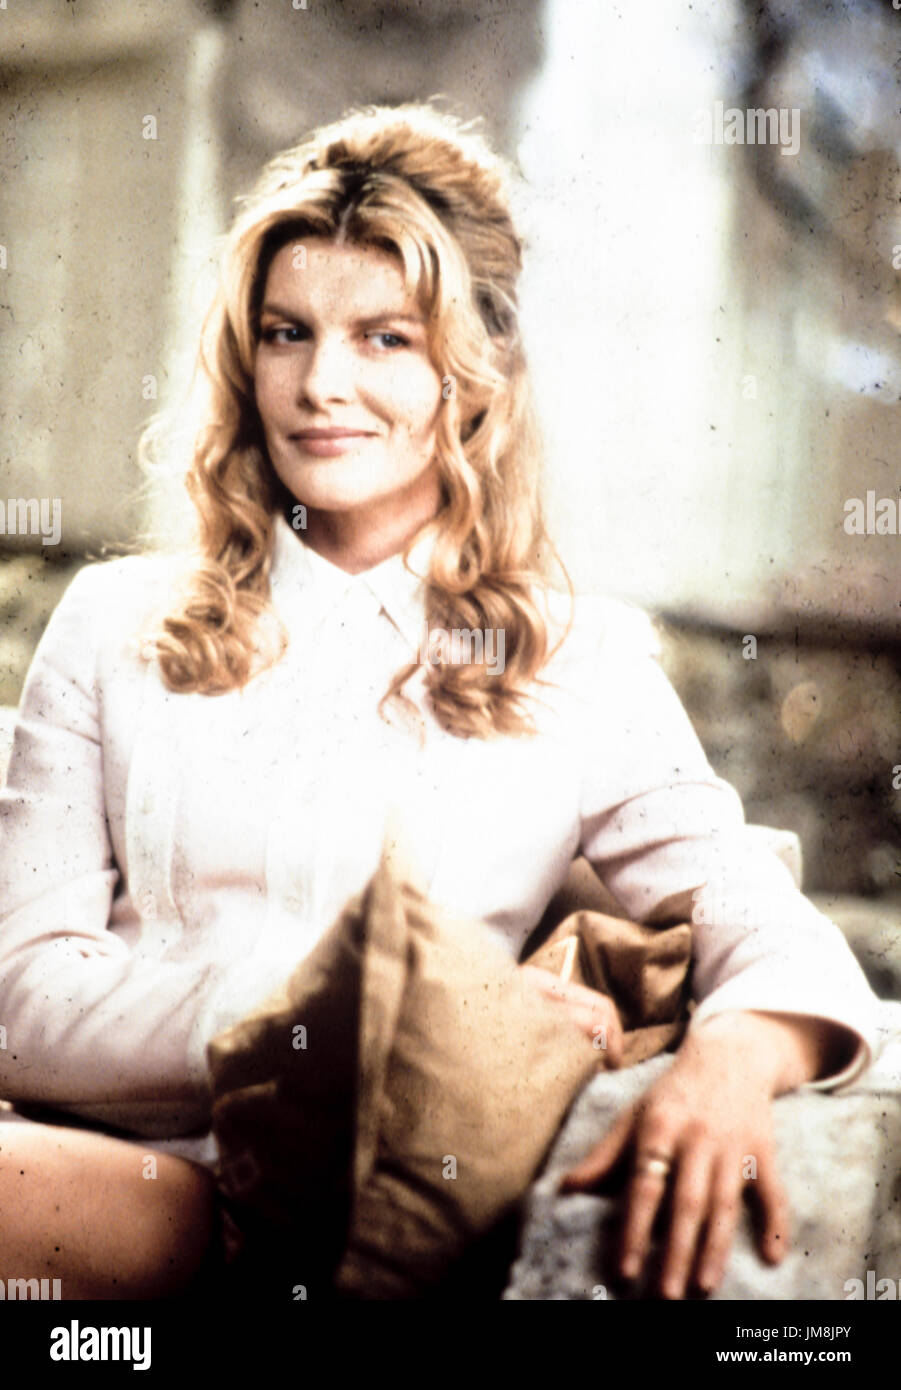 Rene Russo, get shorty, 1995 Foto Stock